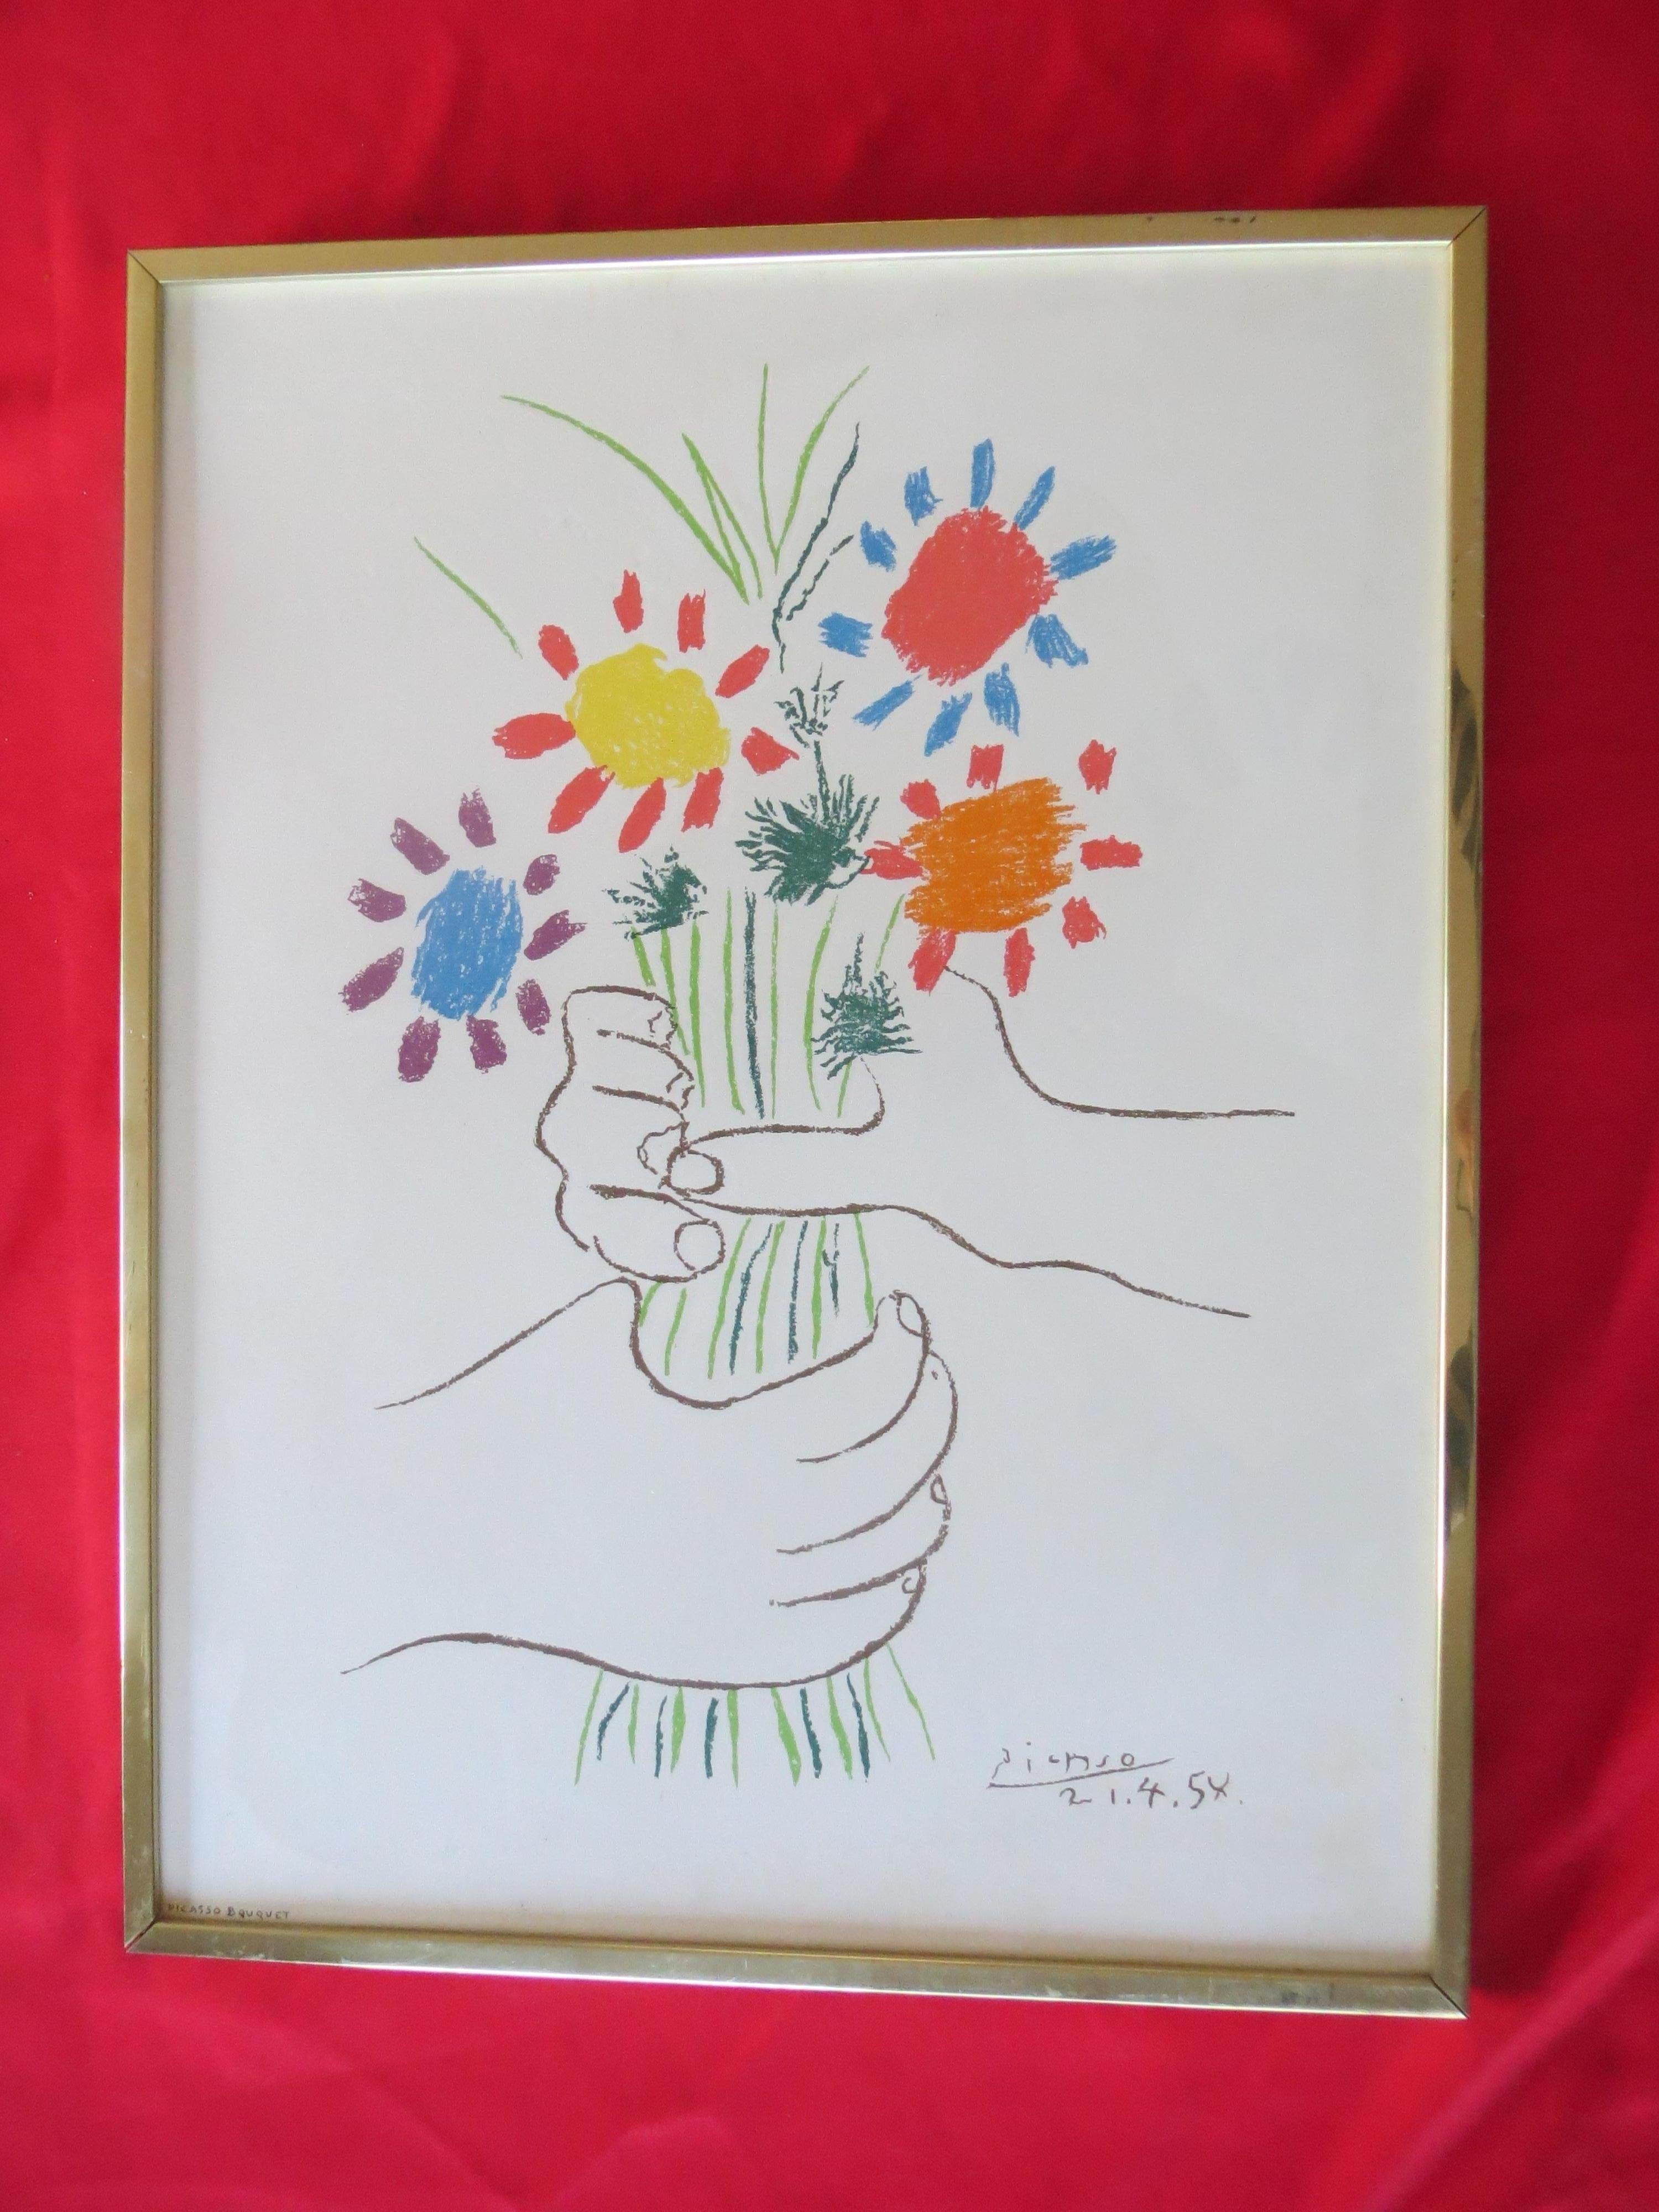 (after) Pablo Picasso Figurative Print - After PABLO PICASSO  Colorful Flowers 1958 